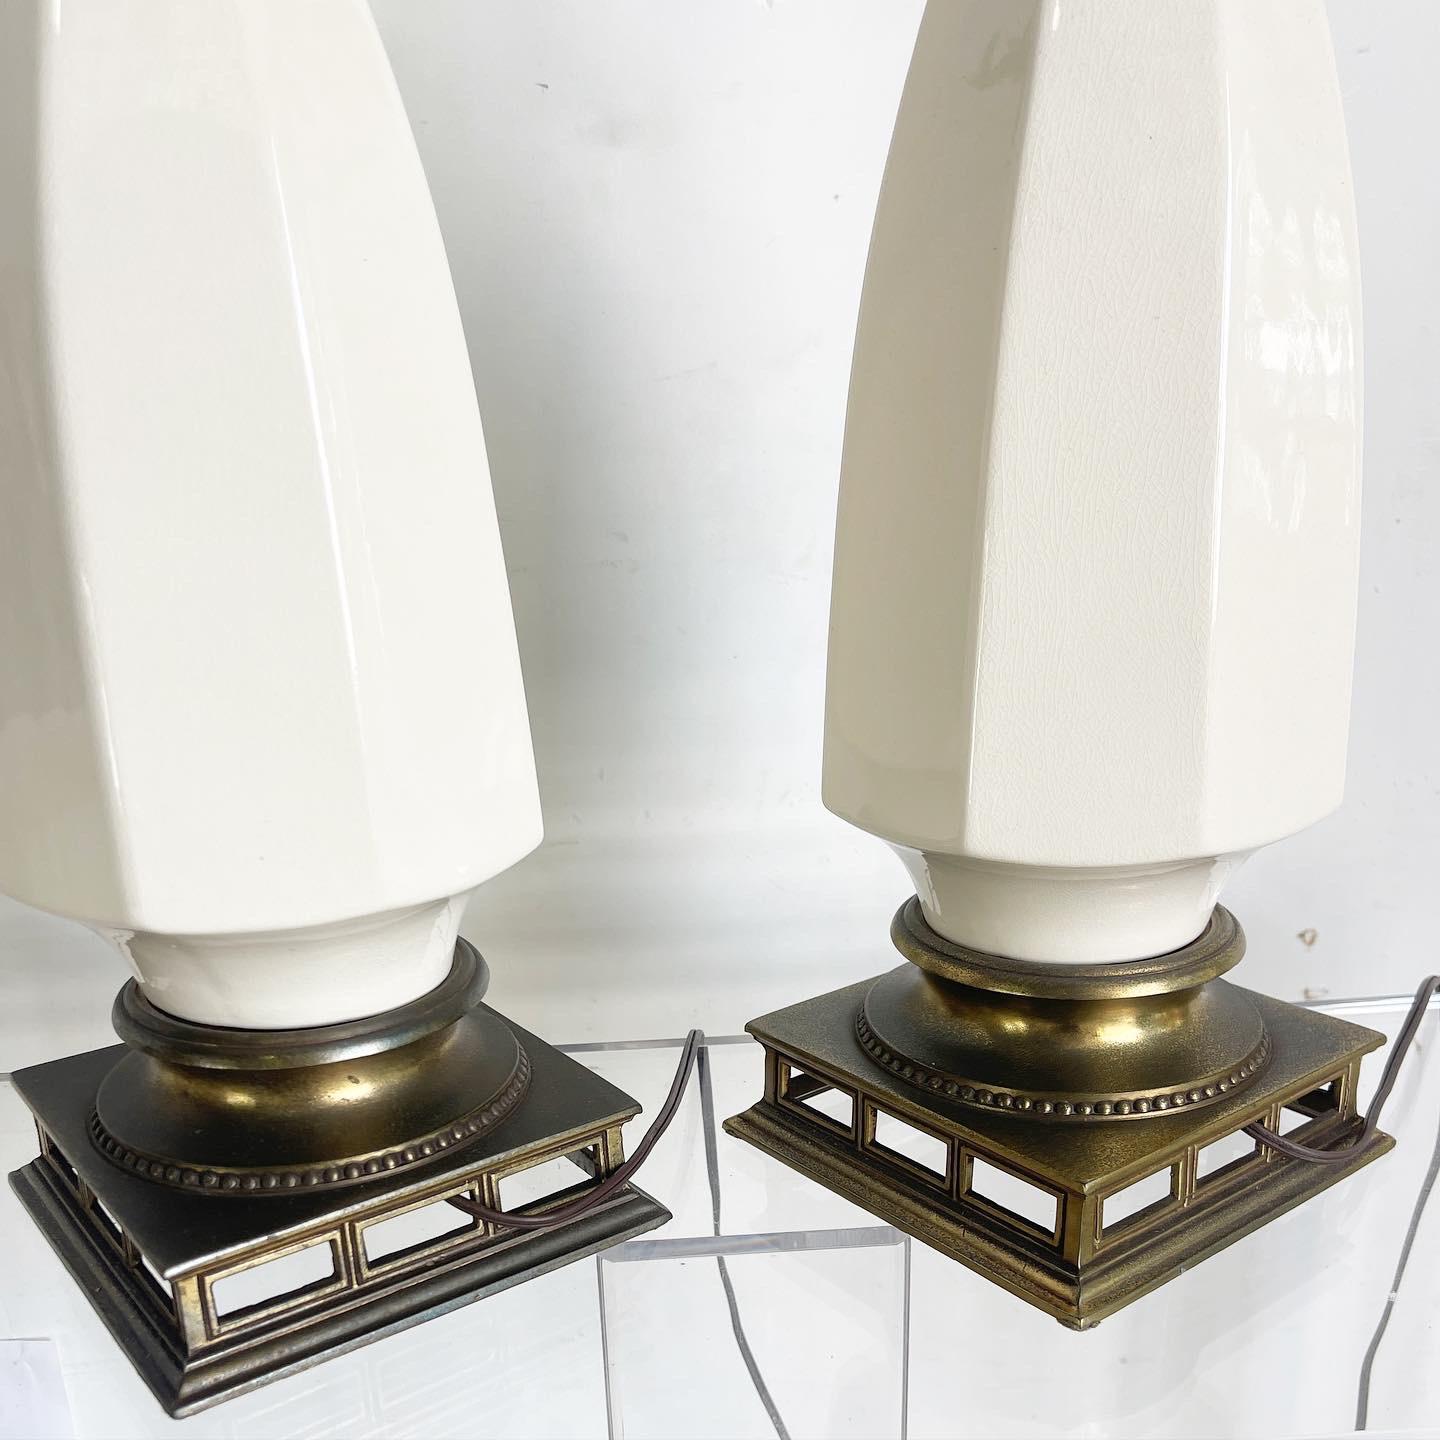 Late 20th Century Hollywood Regency Creams Ceramic and Brass Pineapple Table Lamps - a Pair For Sale